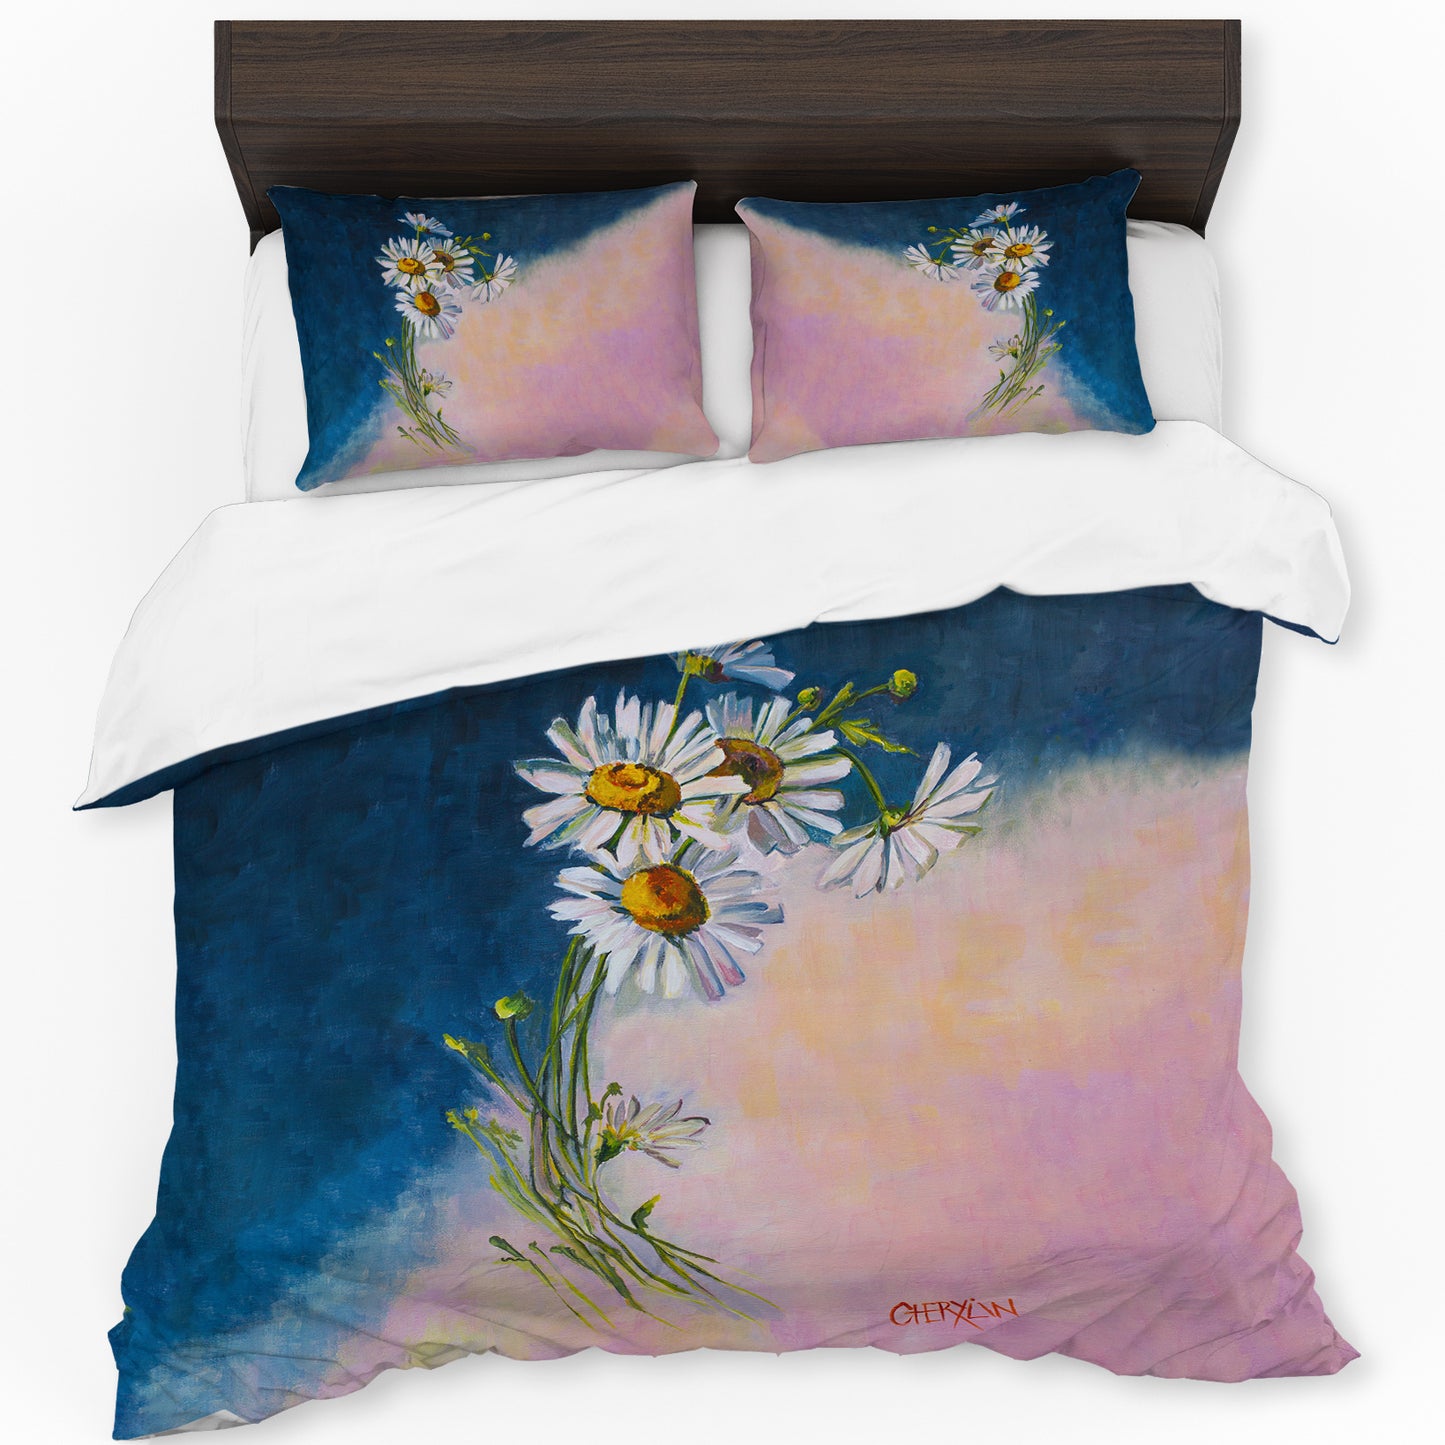 Bunch of Daisies By Cherylin Louw Duvet Cover Set